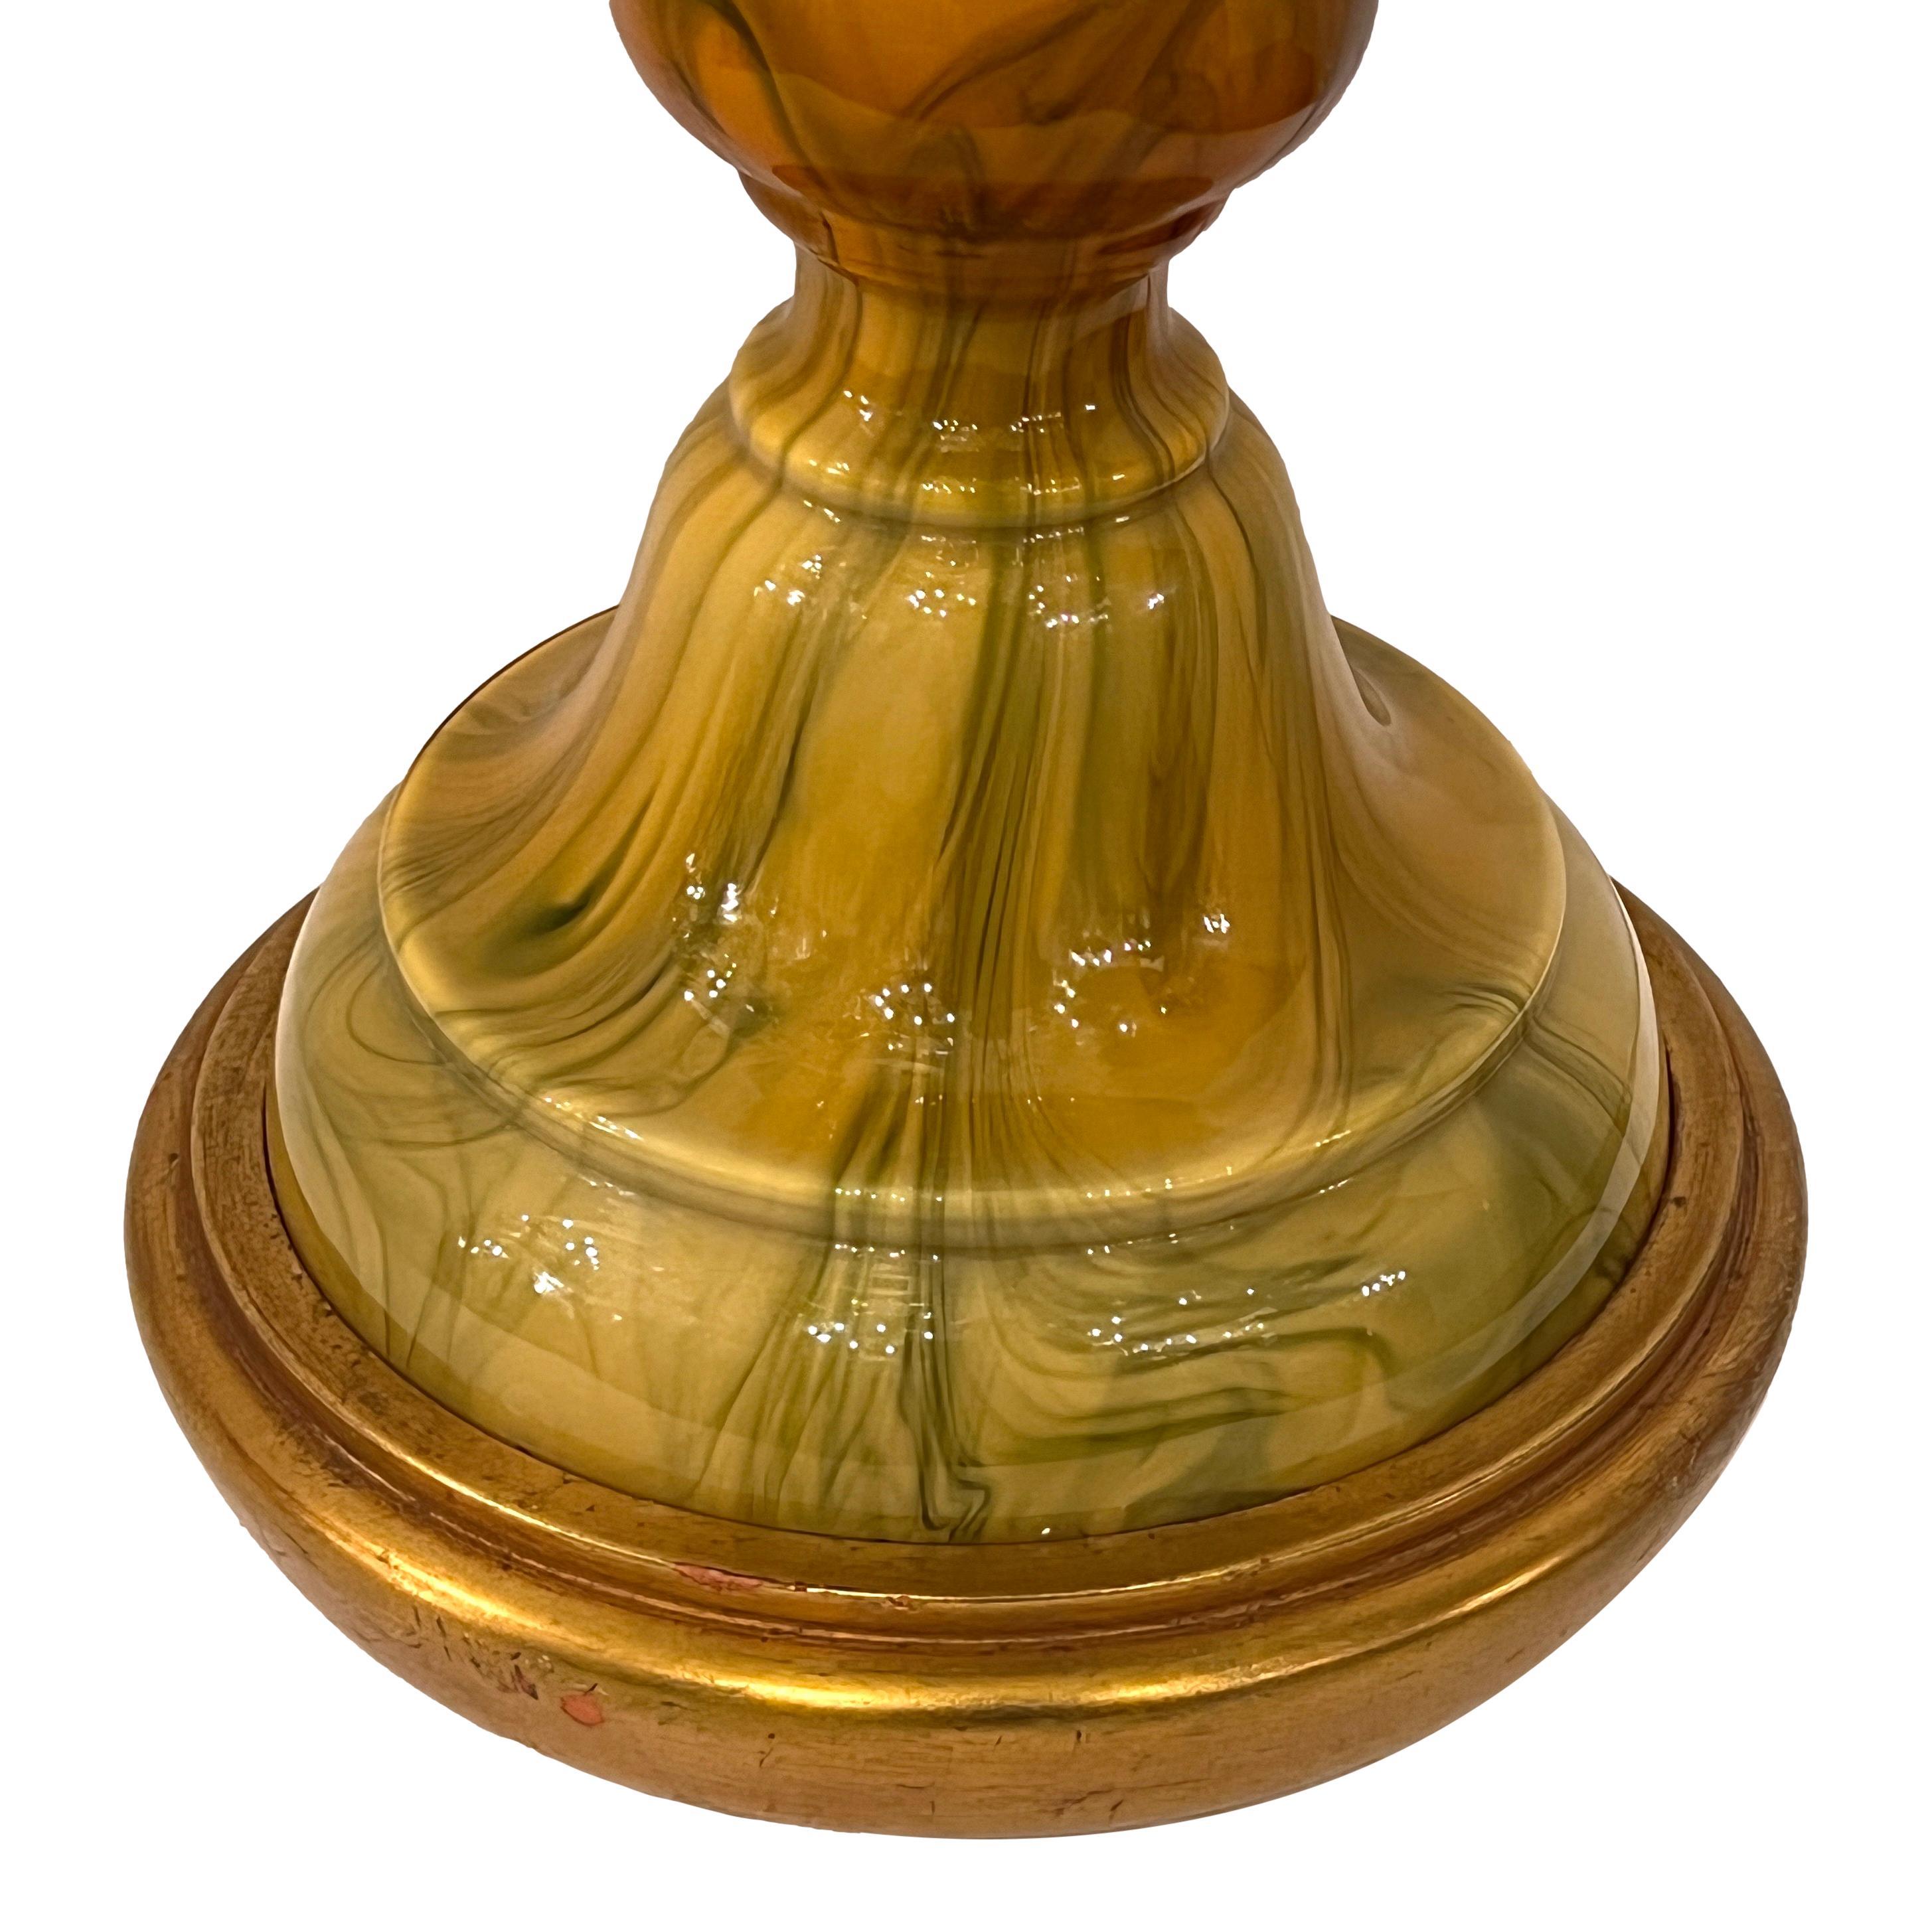 A circa 1960s Italian Murano art glass table lamp with gilt base. 

Measurements:
Height of body: 23